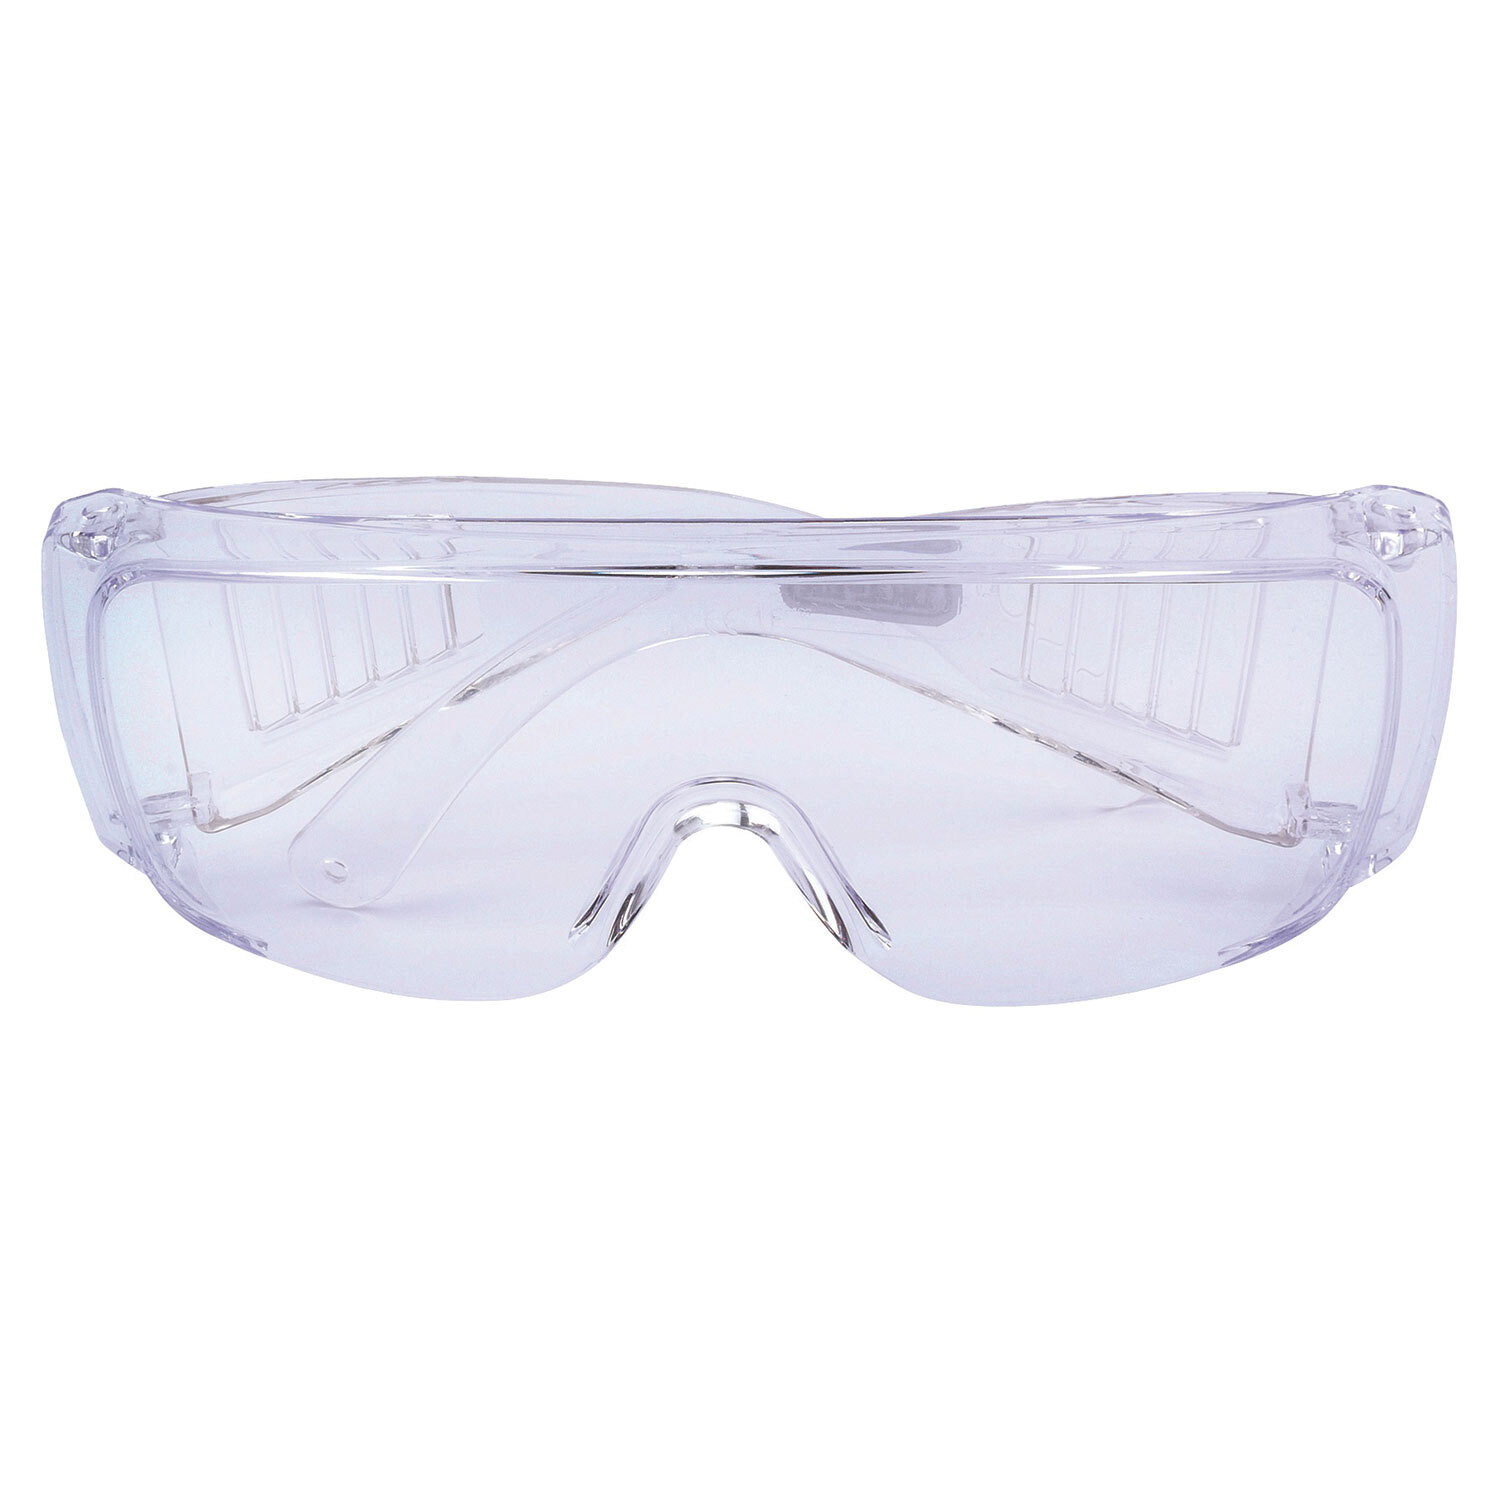 Draper Clear Protective Safety Glasses Image